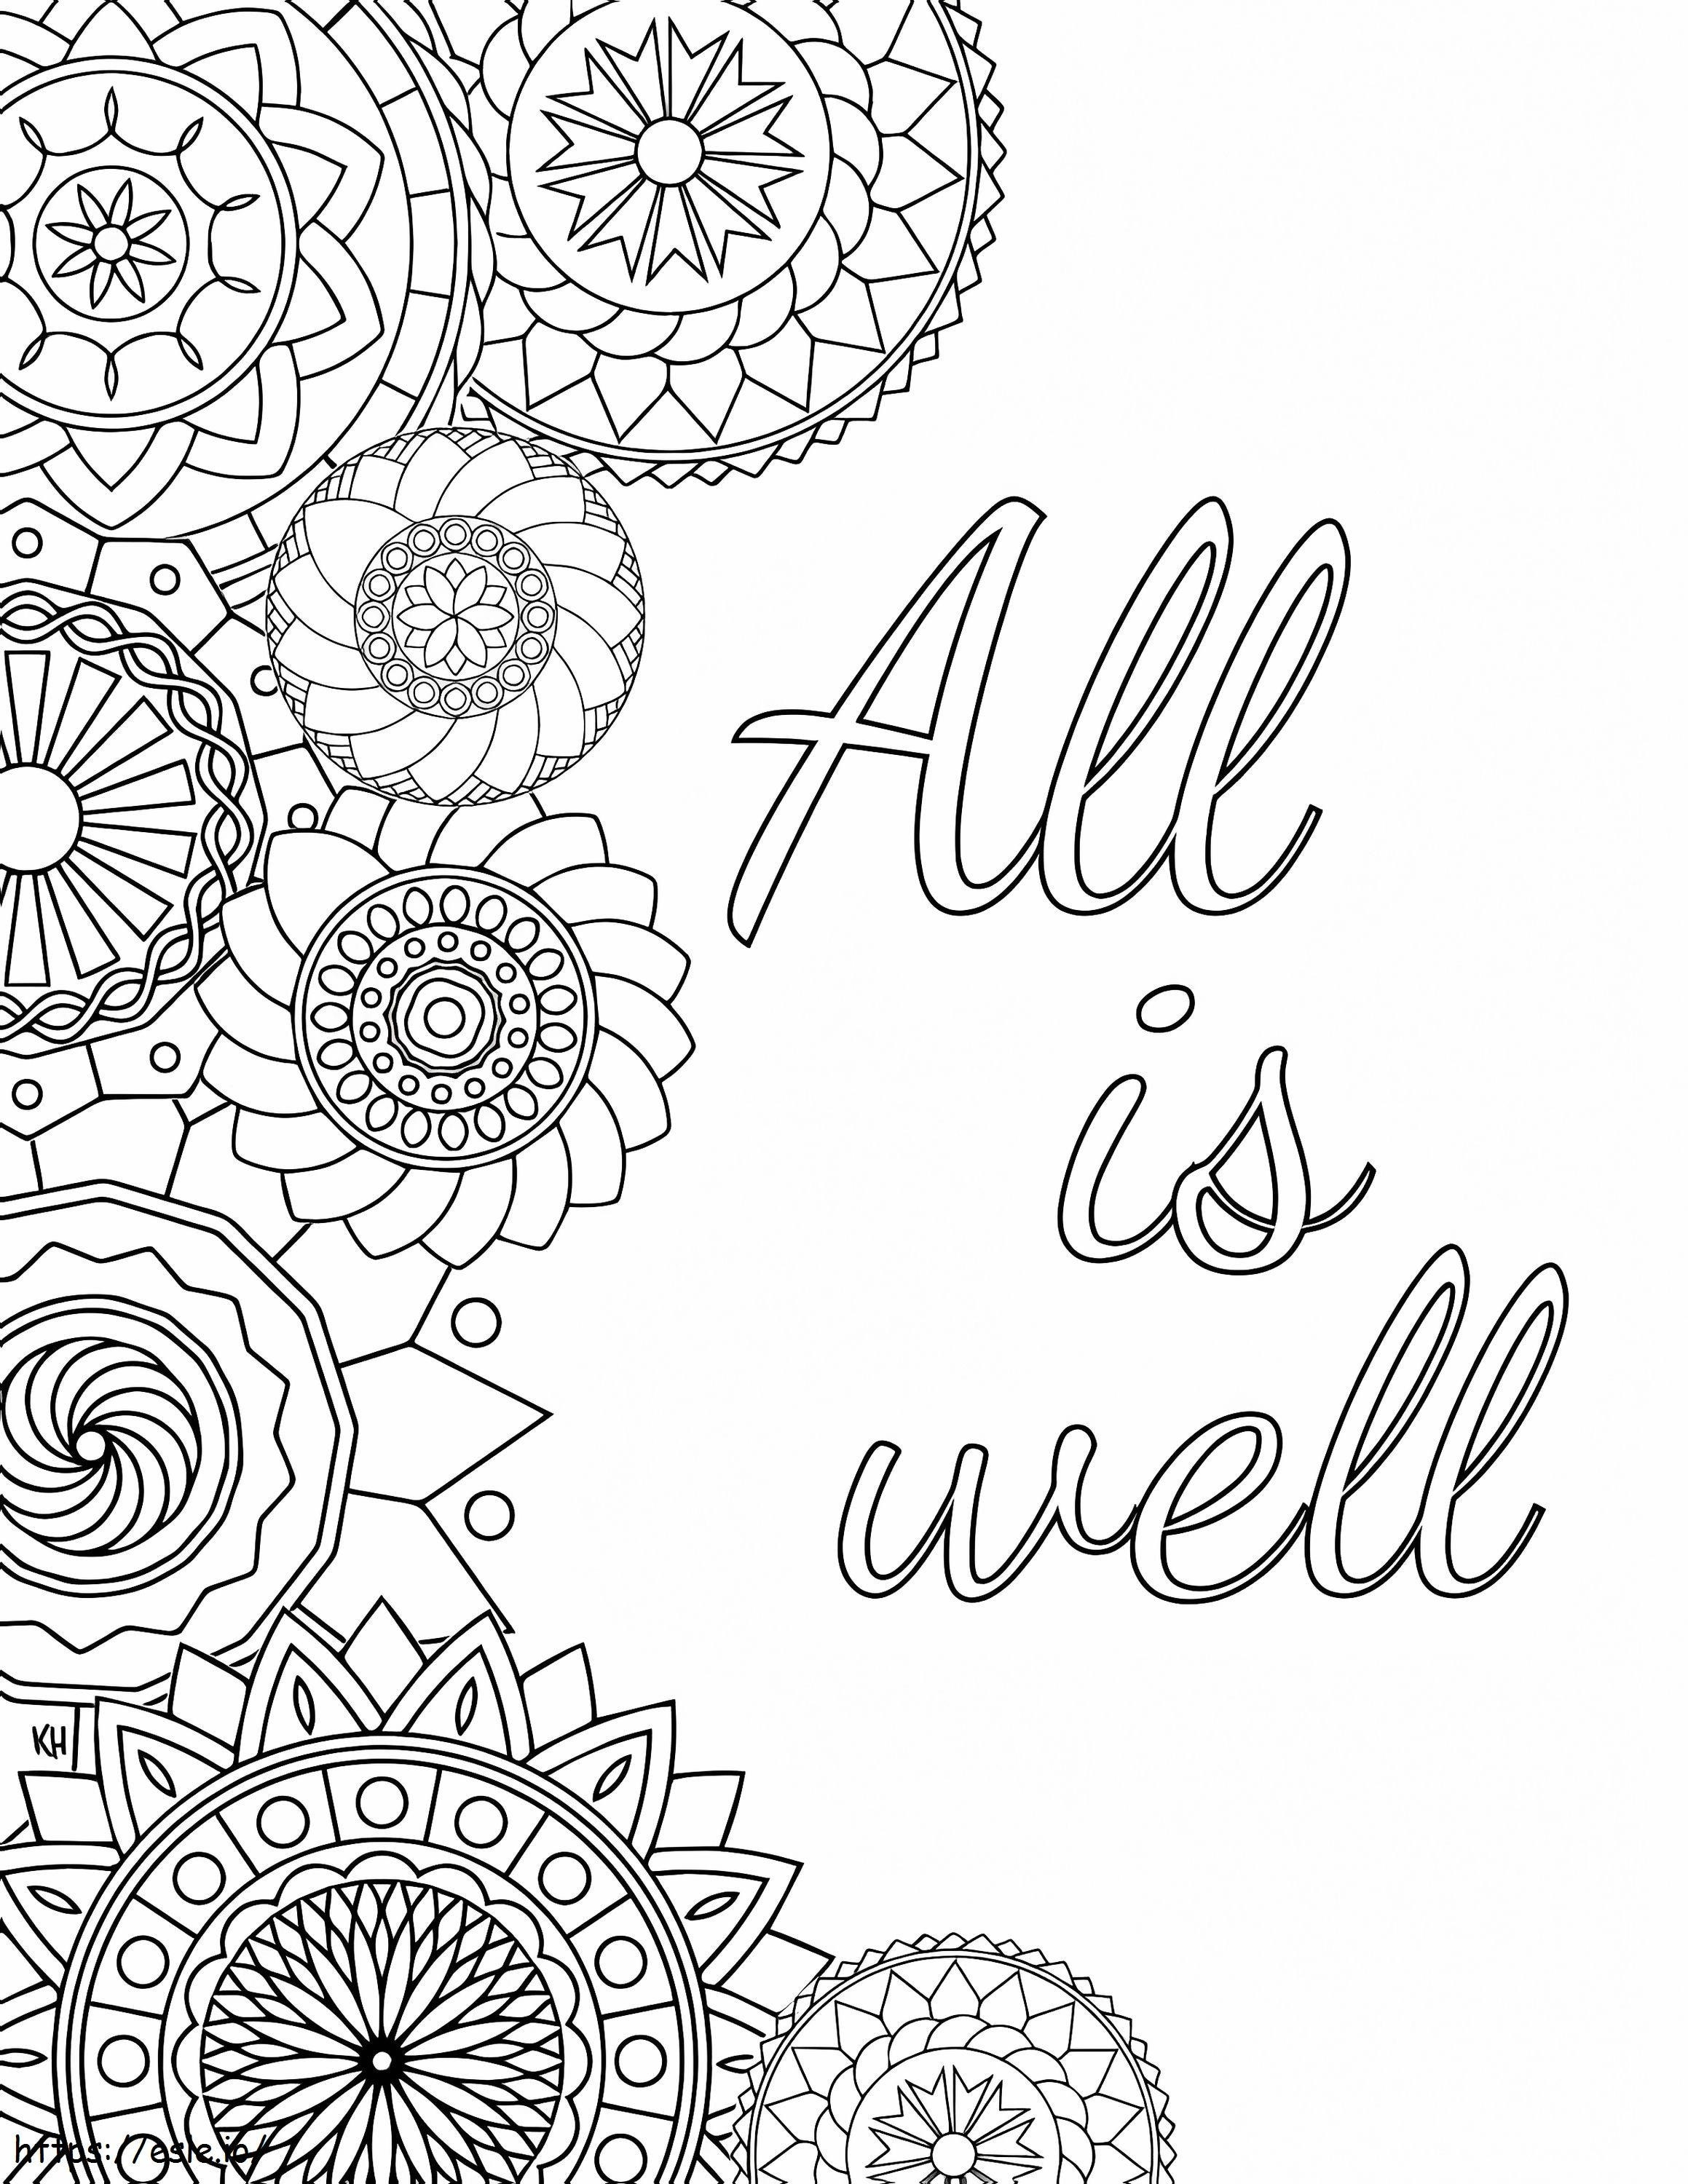 Everything'S Fine coloring page